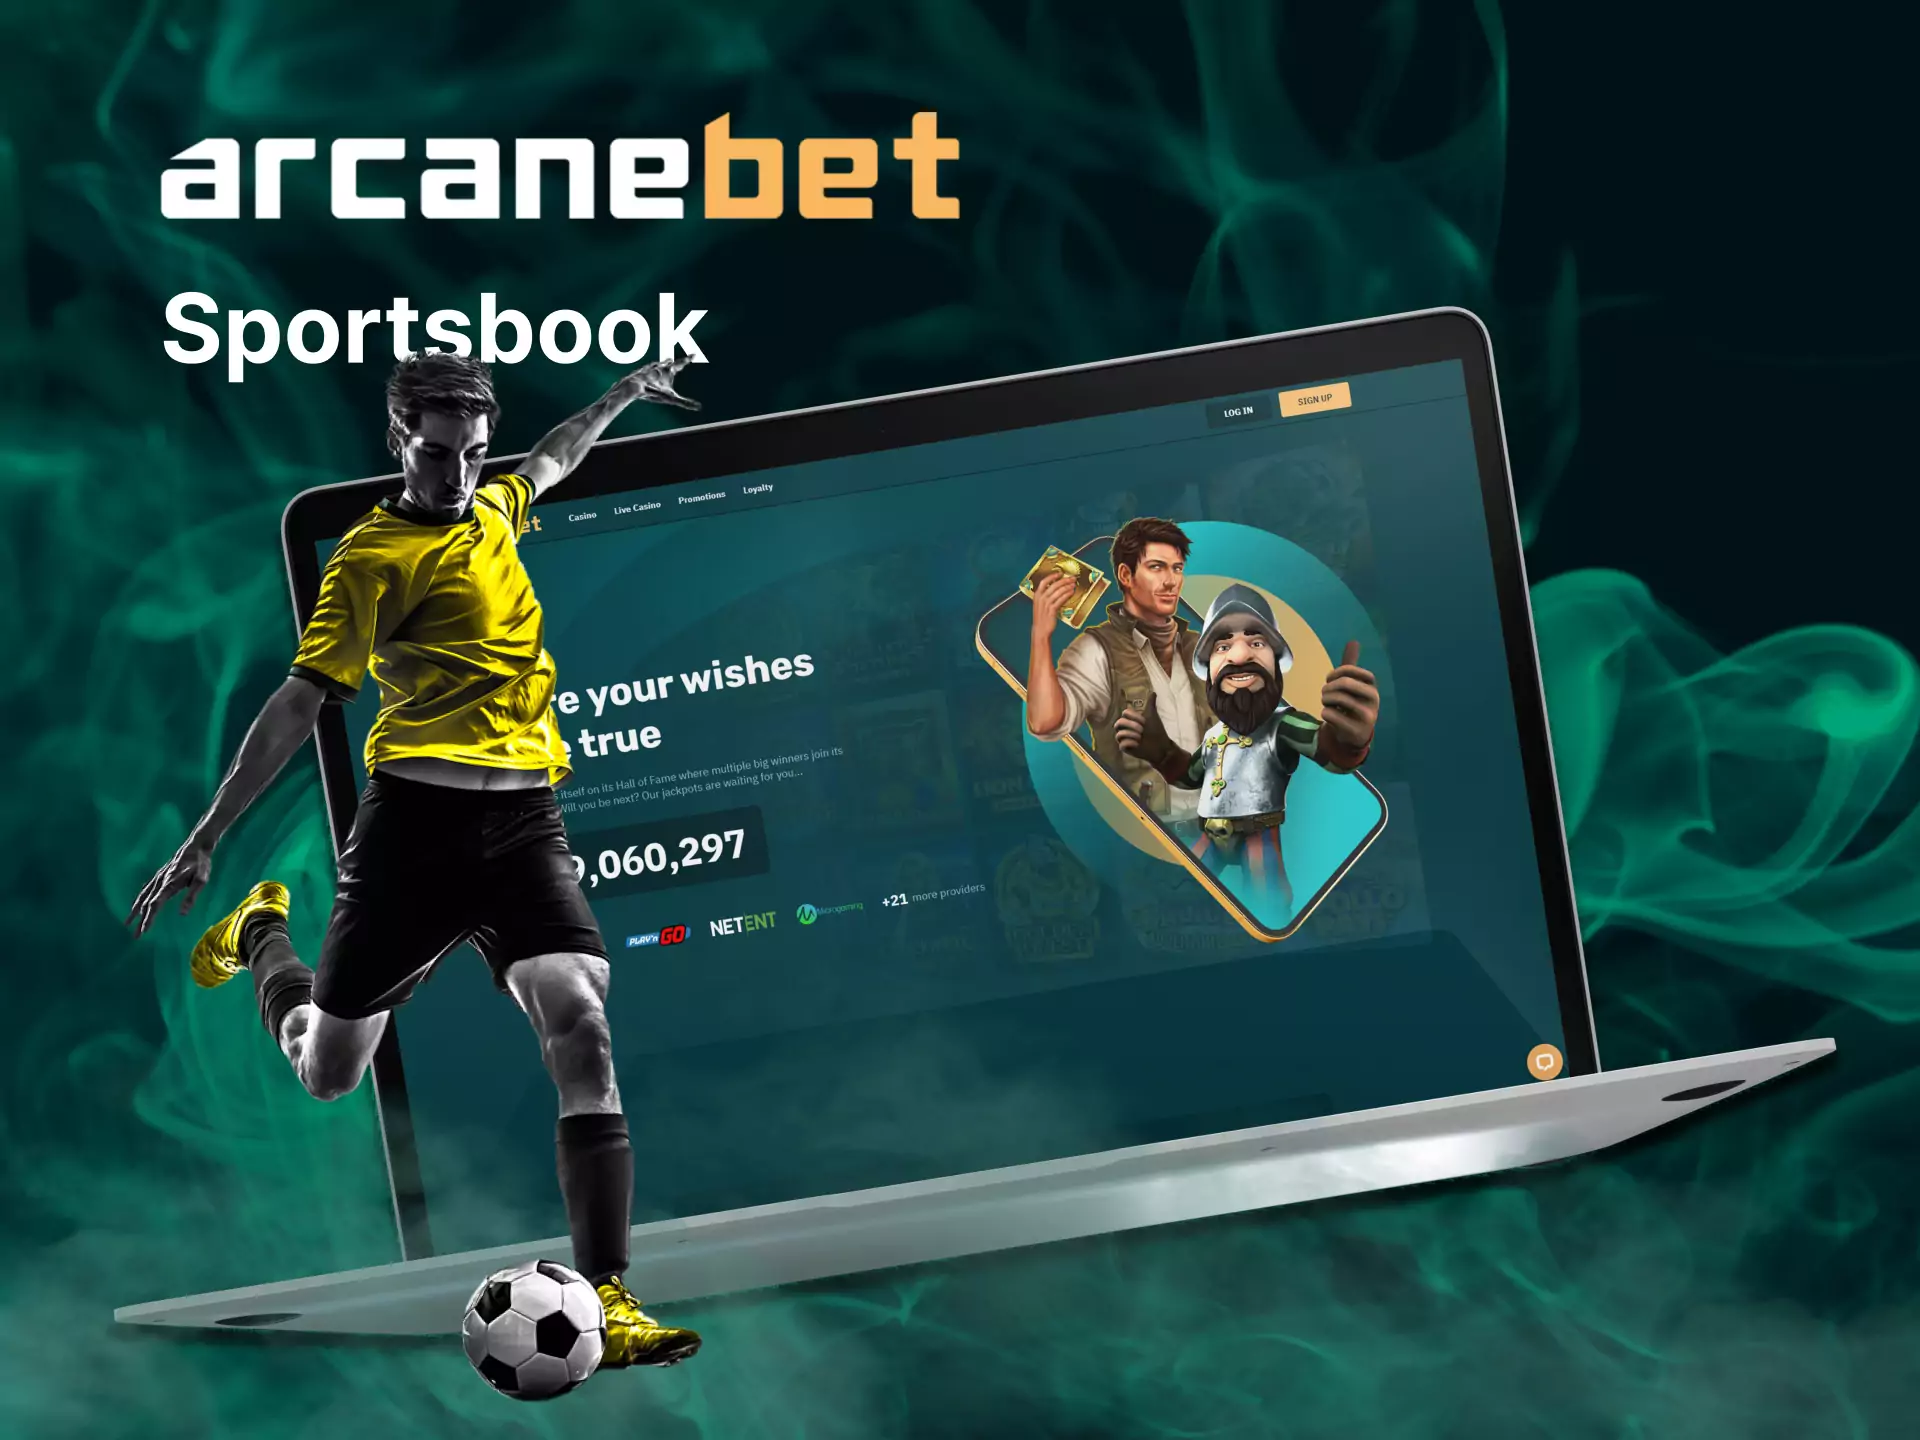 Place bets on any sporting events on Arcanebet.